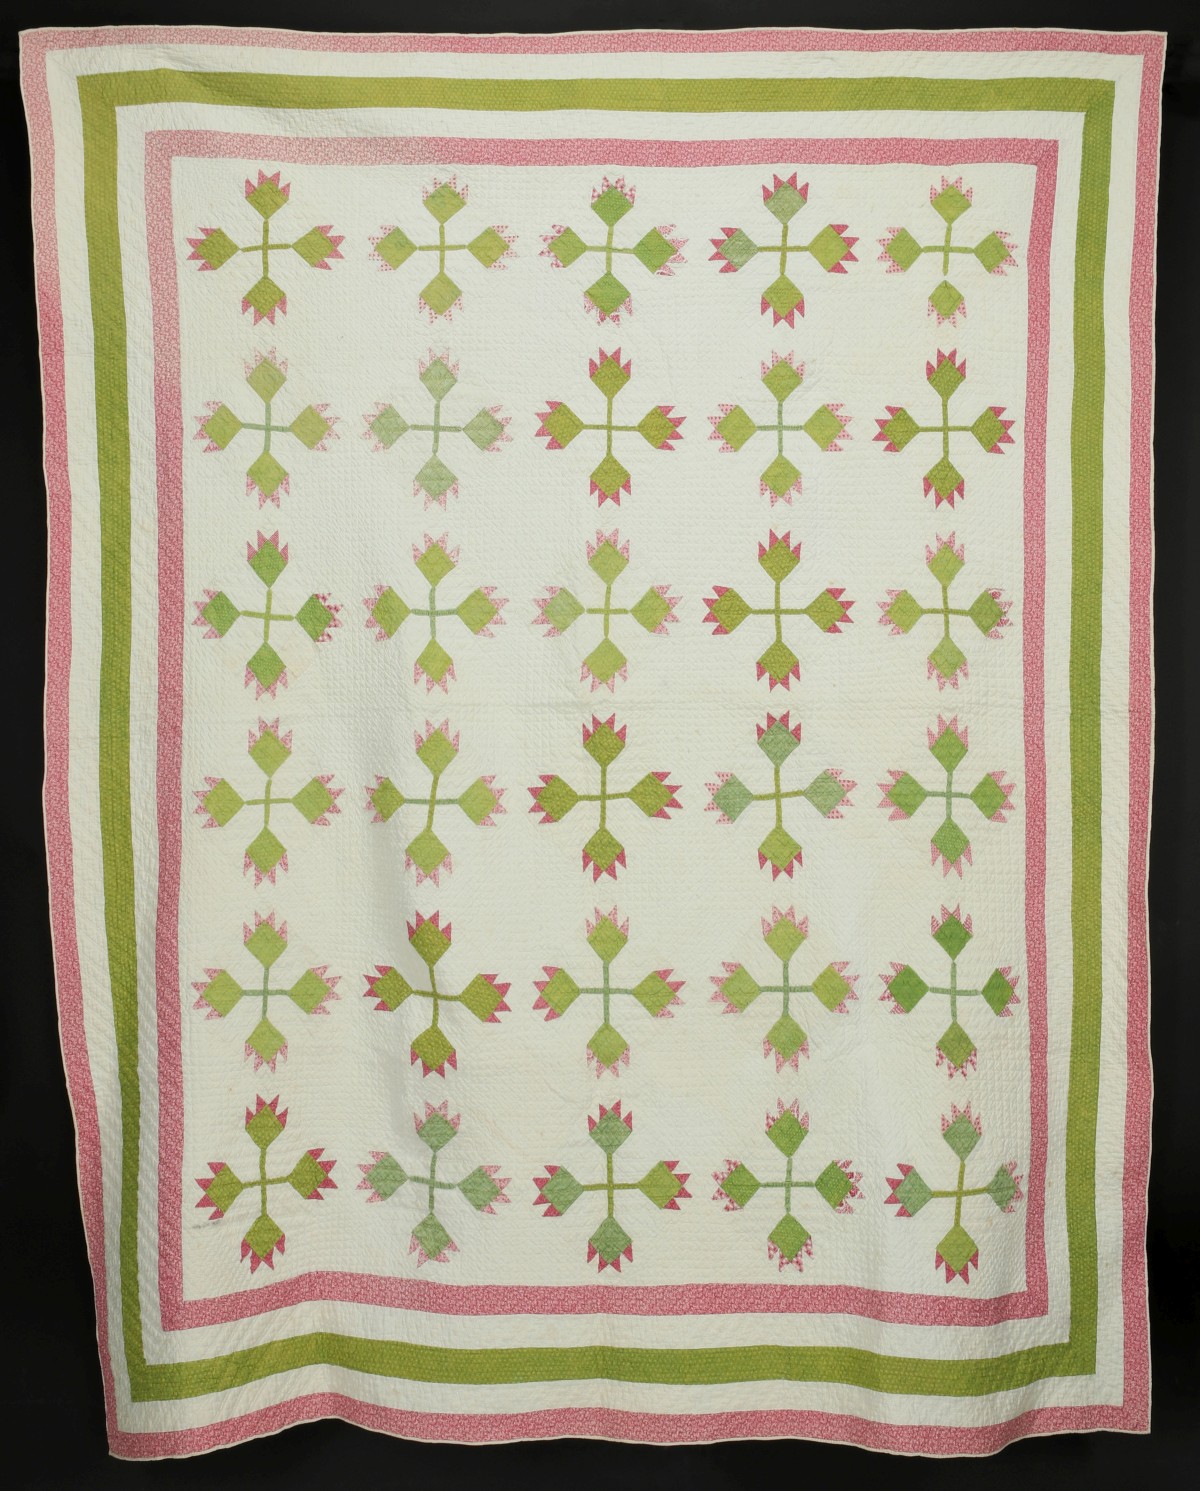 AN ANTIQUE NORTH CAROLINA LILY PATTERN QUILT